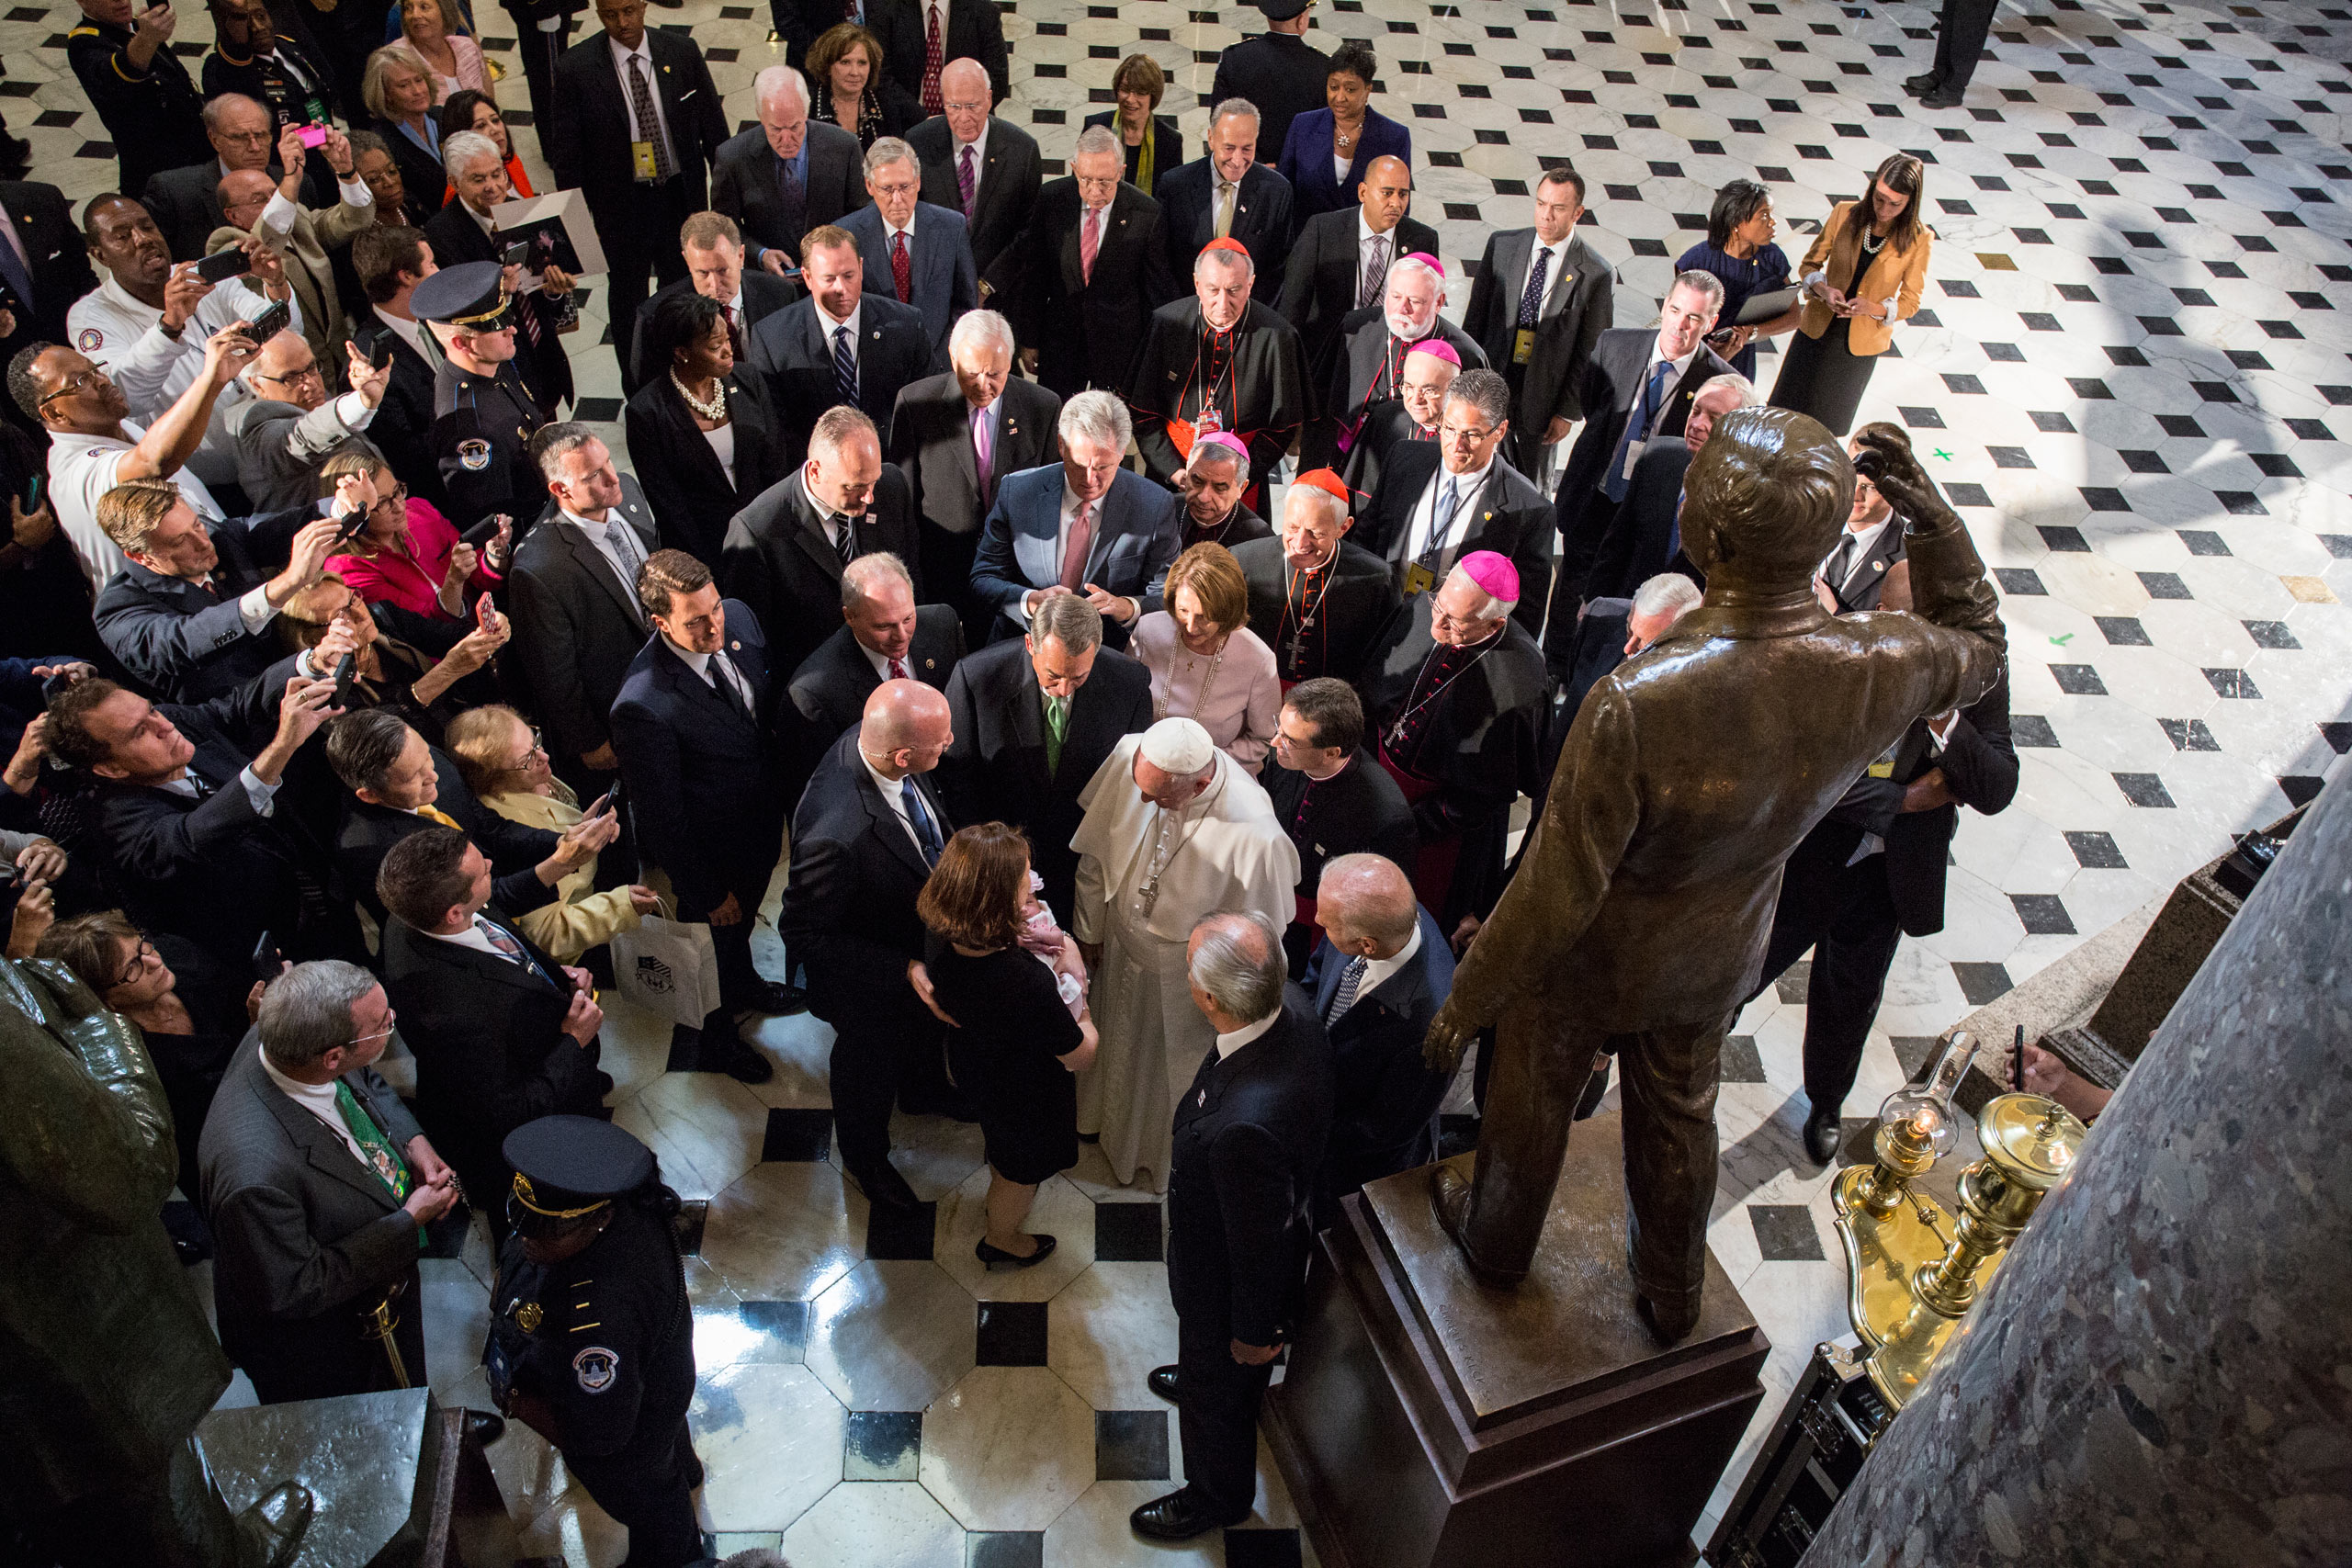 Pope Francis blesses an unidentified child  in Statuary Hall at the U.S. Capitol in Washington, D.C. Sept, 24, 2015.